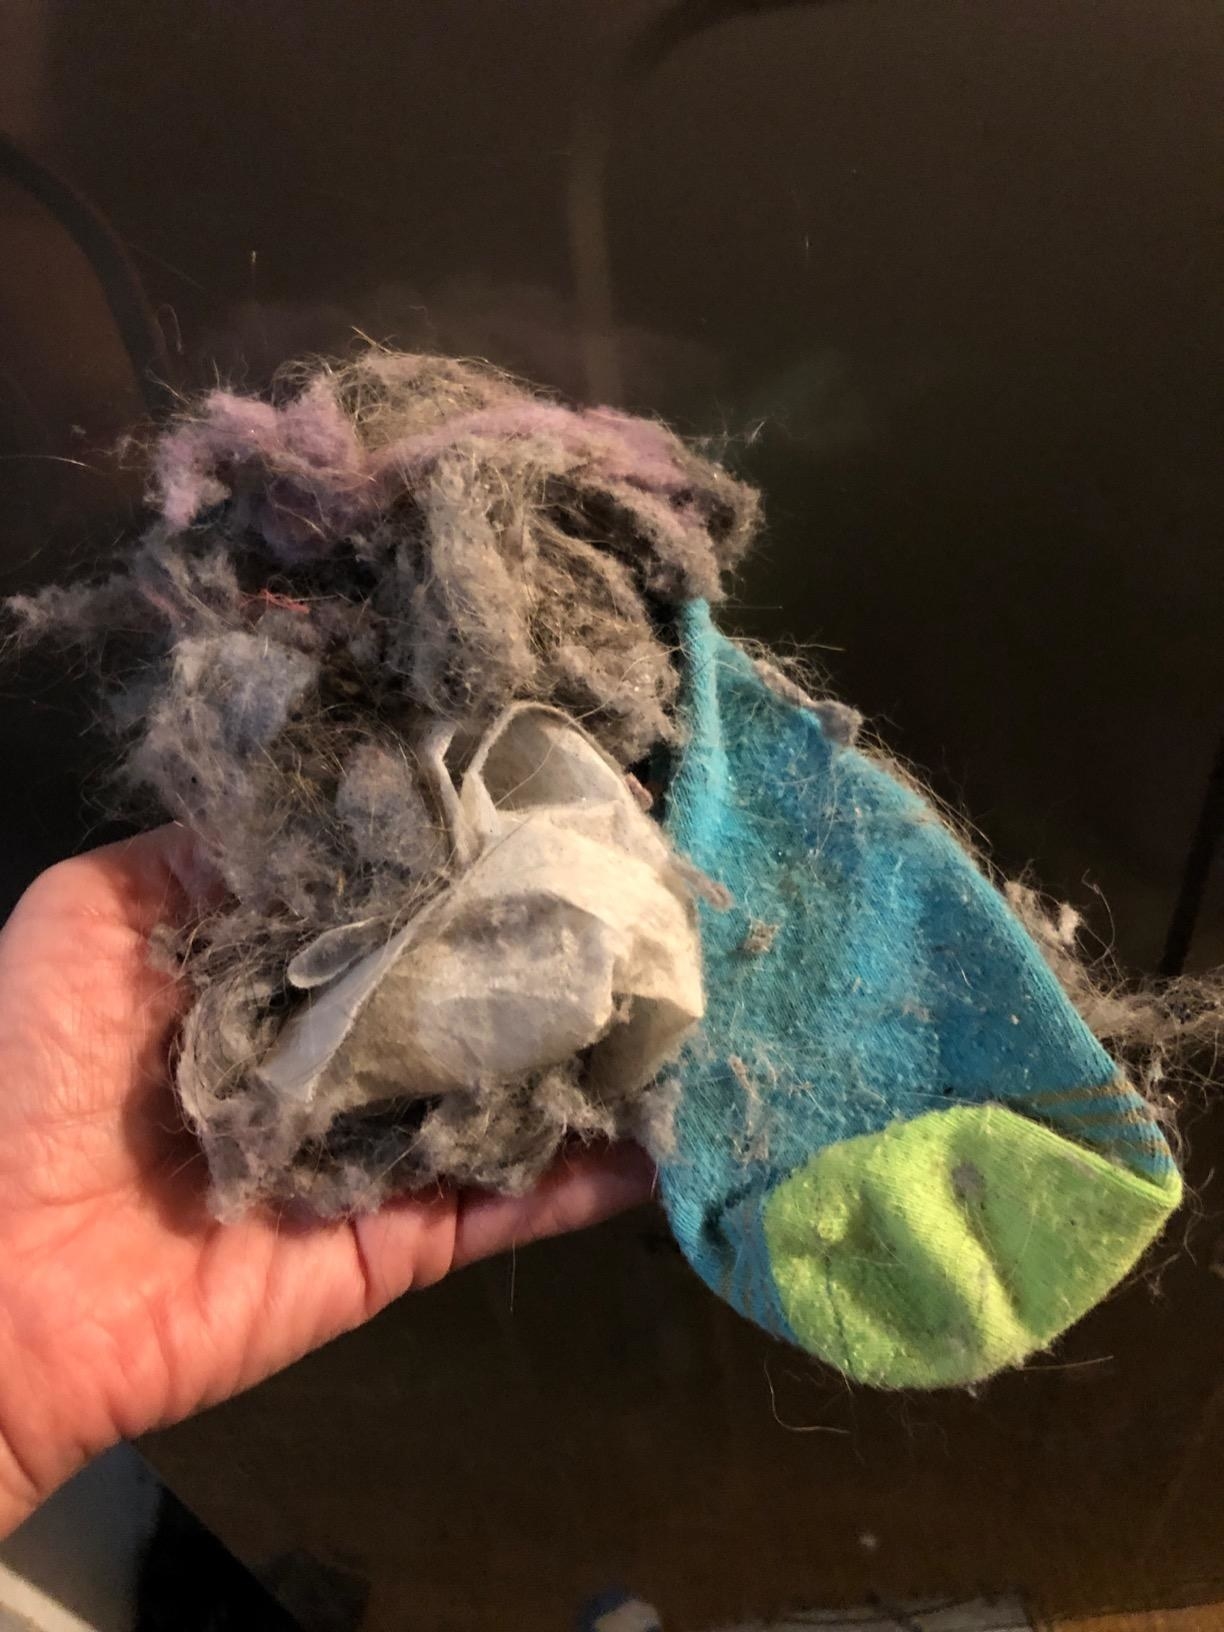 Reviewer showing what was removed from their dryer